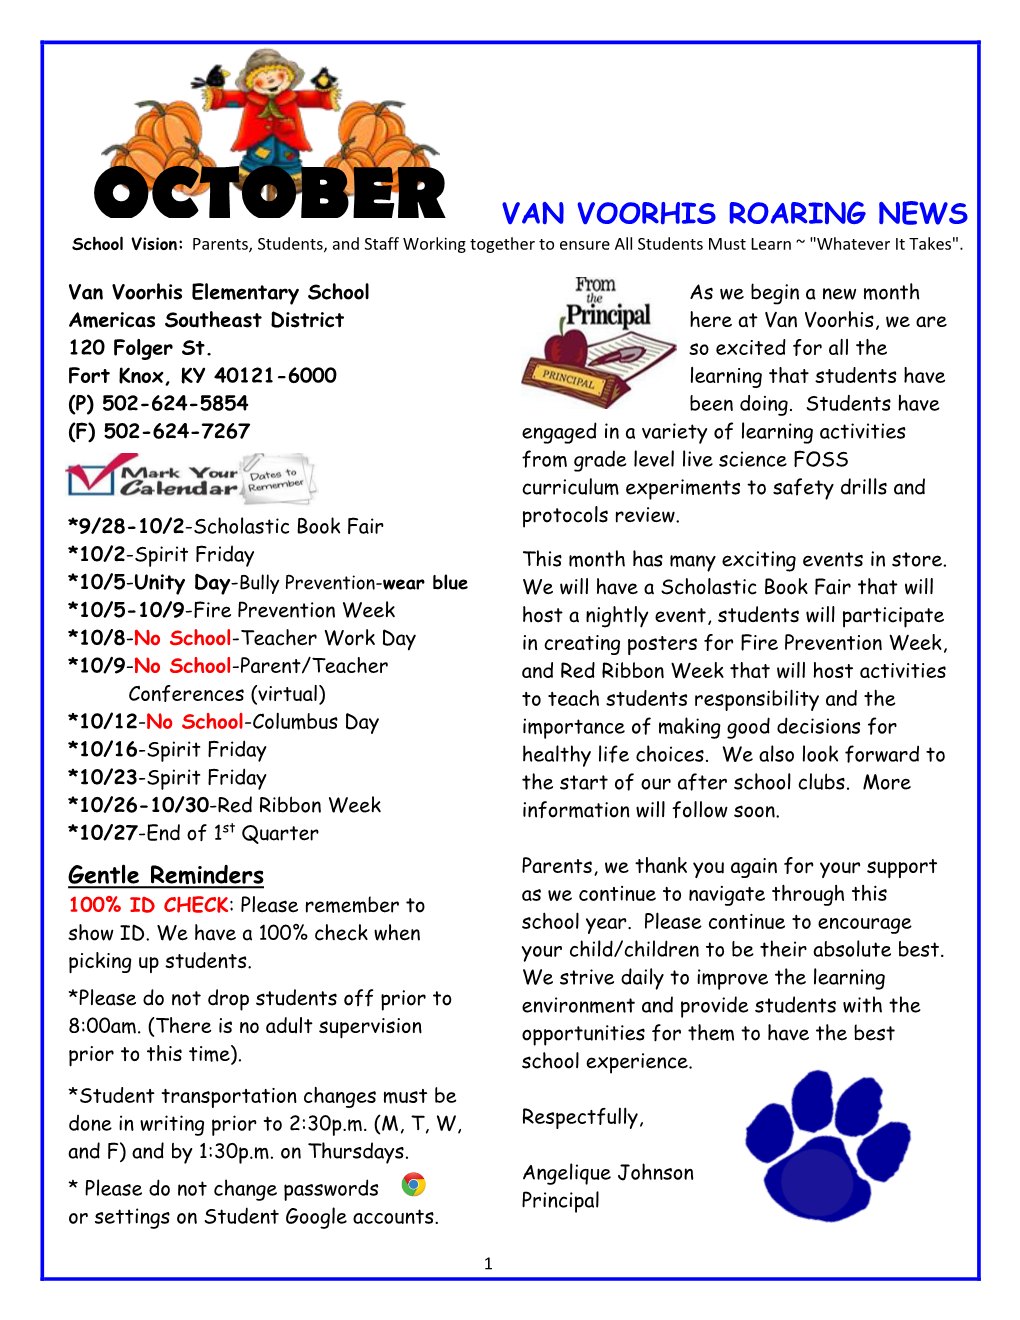 OCTOBER VAN VOORHIS ROARING NEWS School Vision: Parents, Students, and Staff Working Together to Ensure All Students Must Learn ~ "Whatever It Takes"